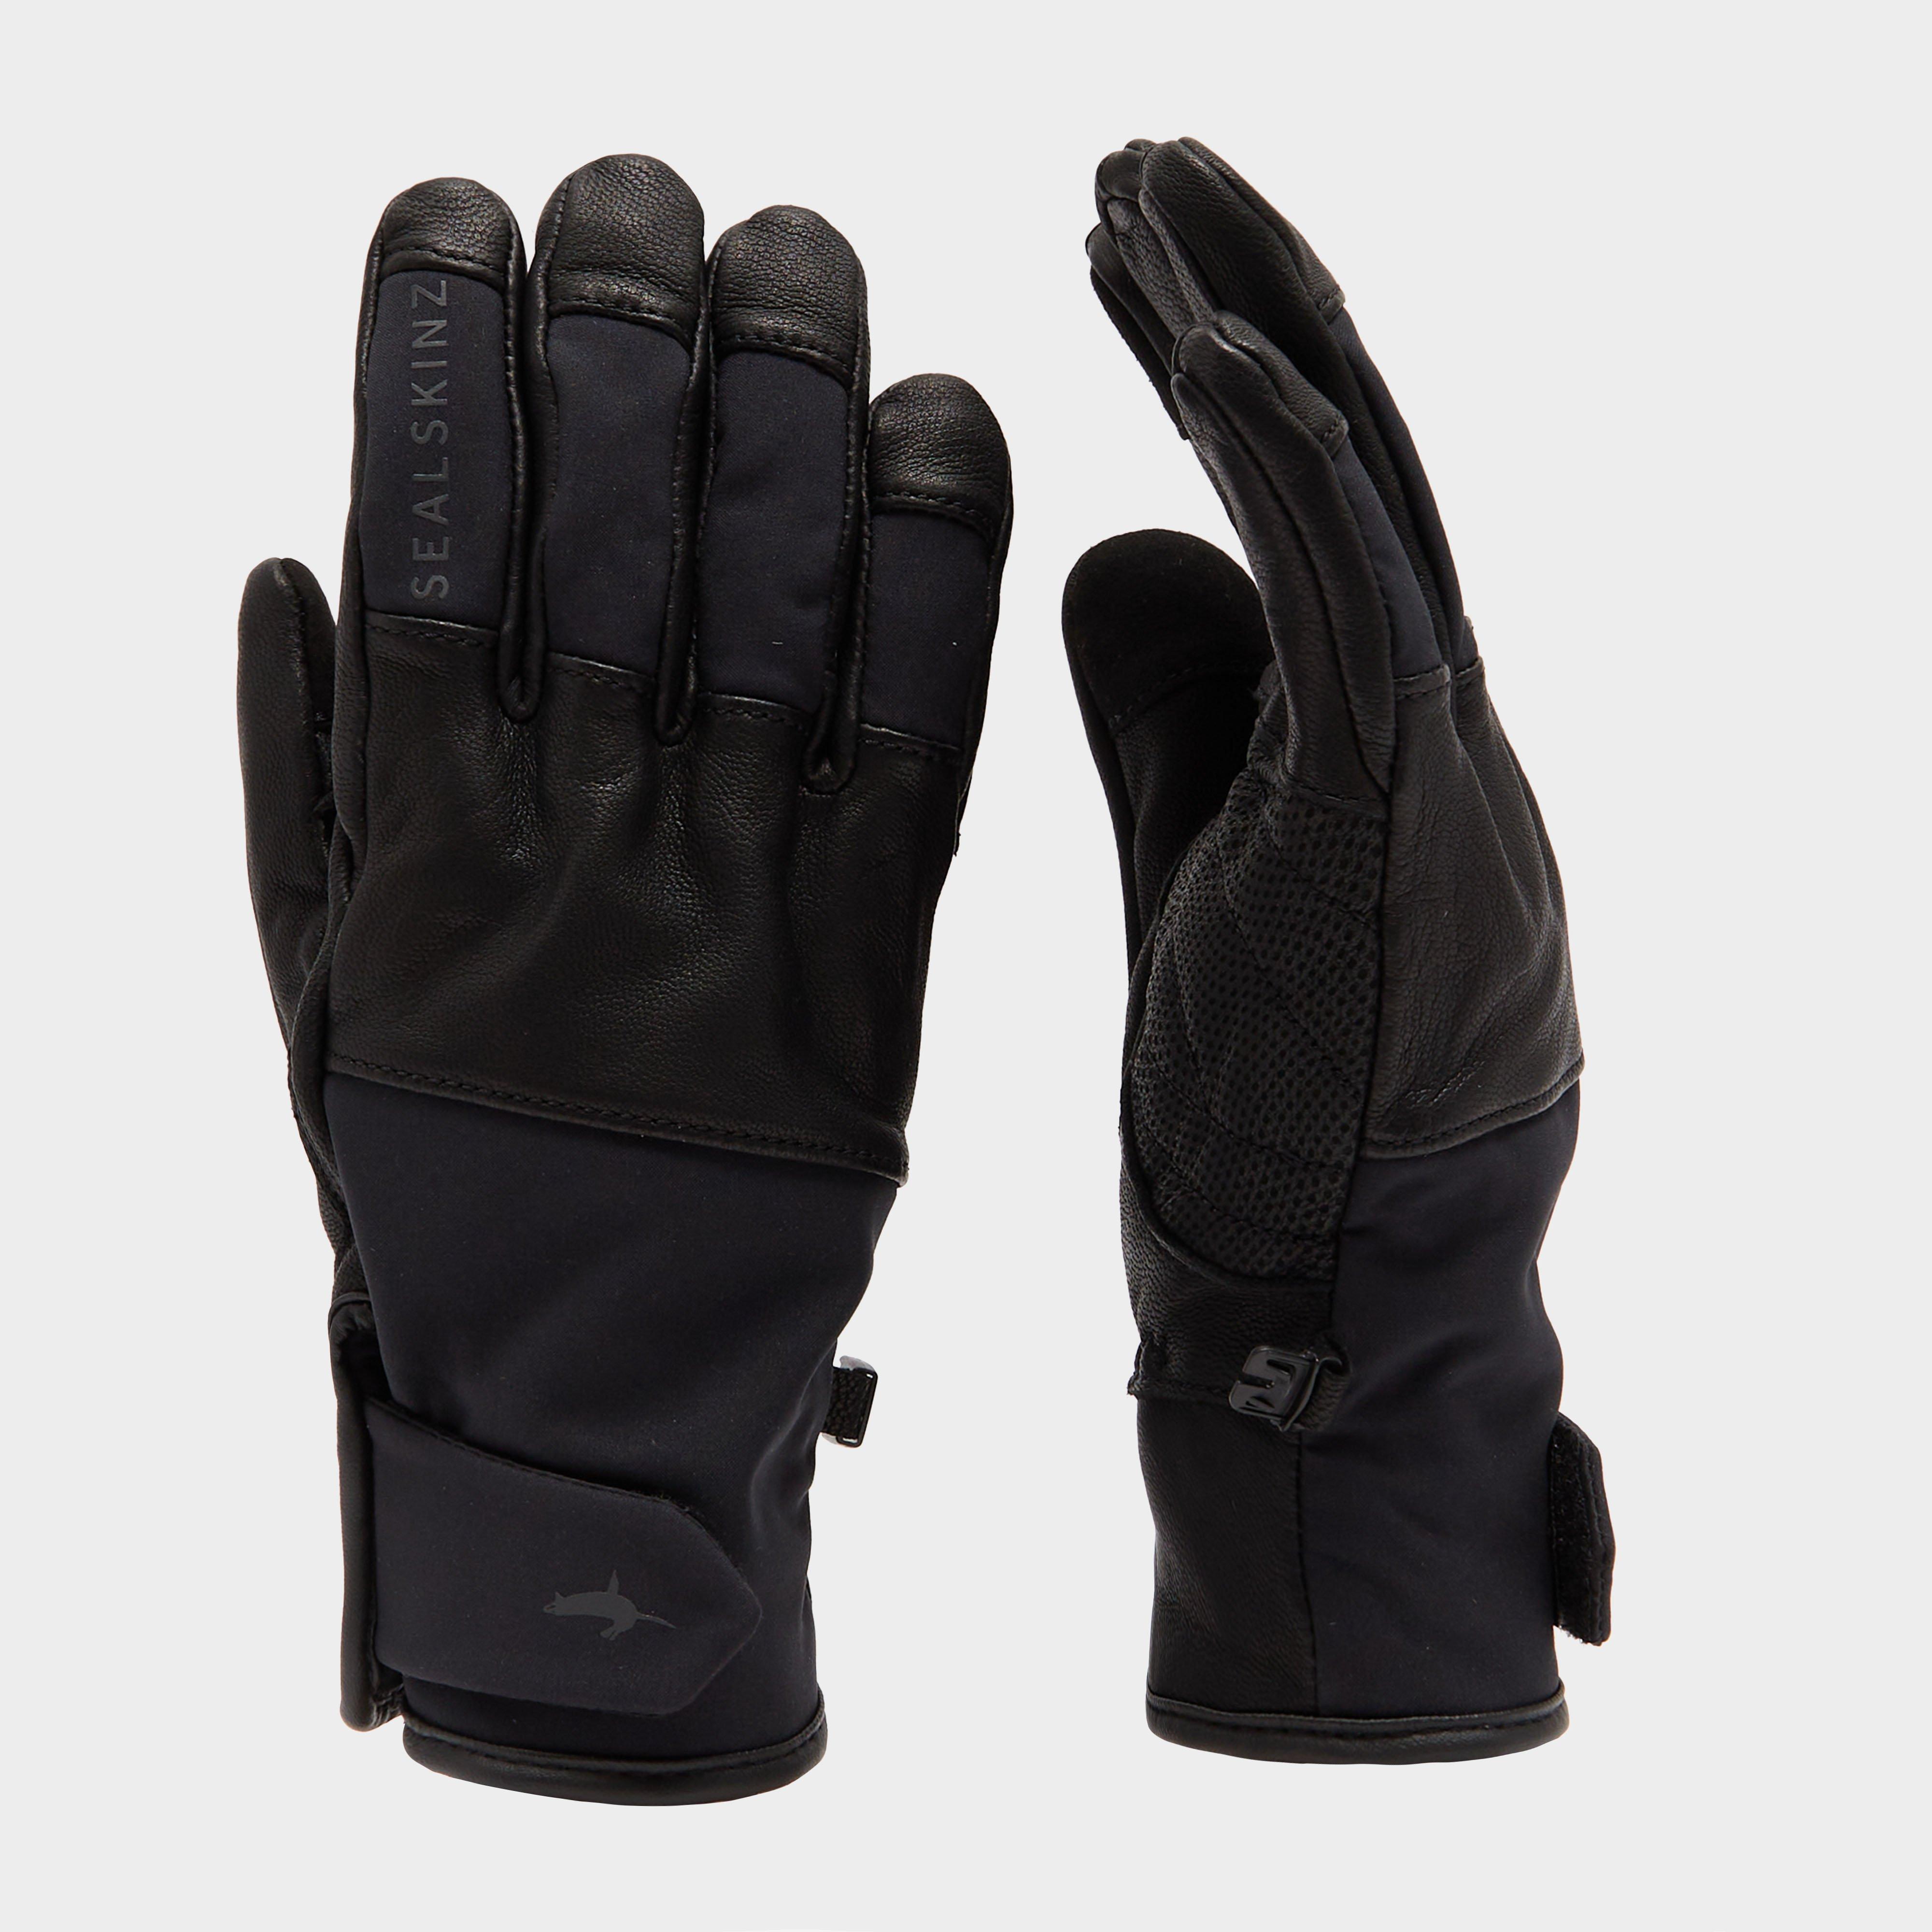 SealSkinz Sealskinz Waterproof Cold Weather Glove With Fusion Control - Black, Black